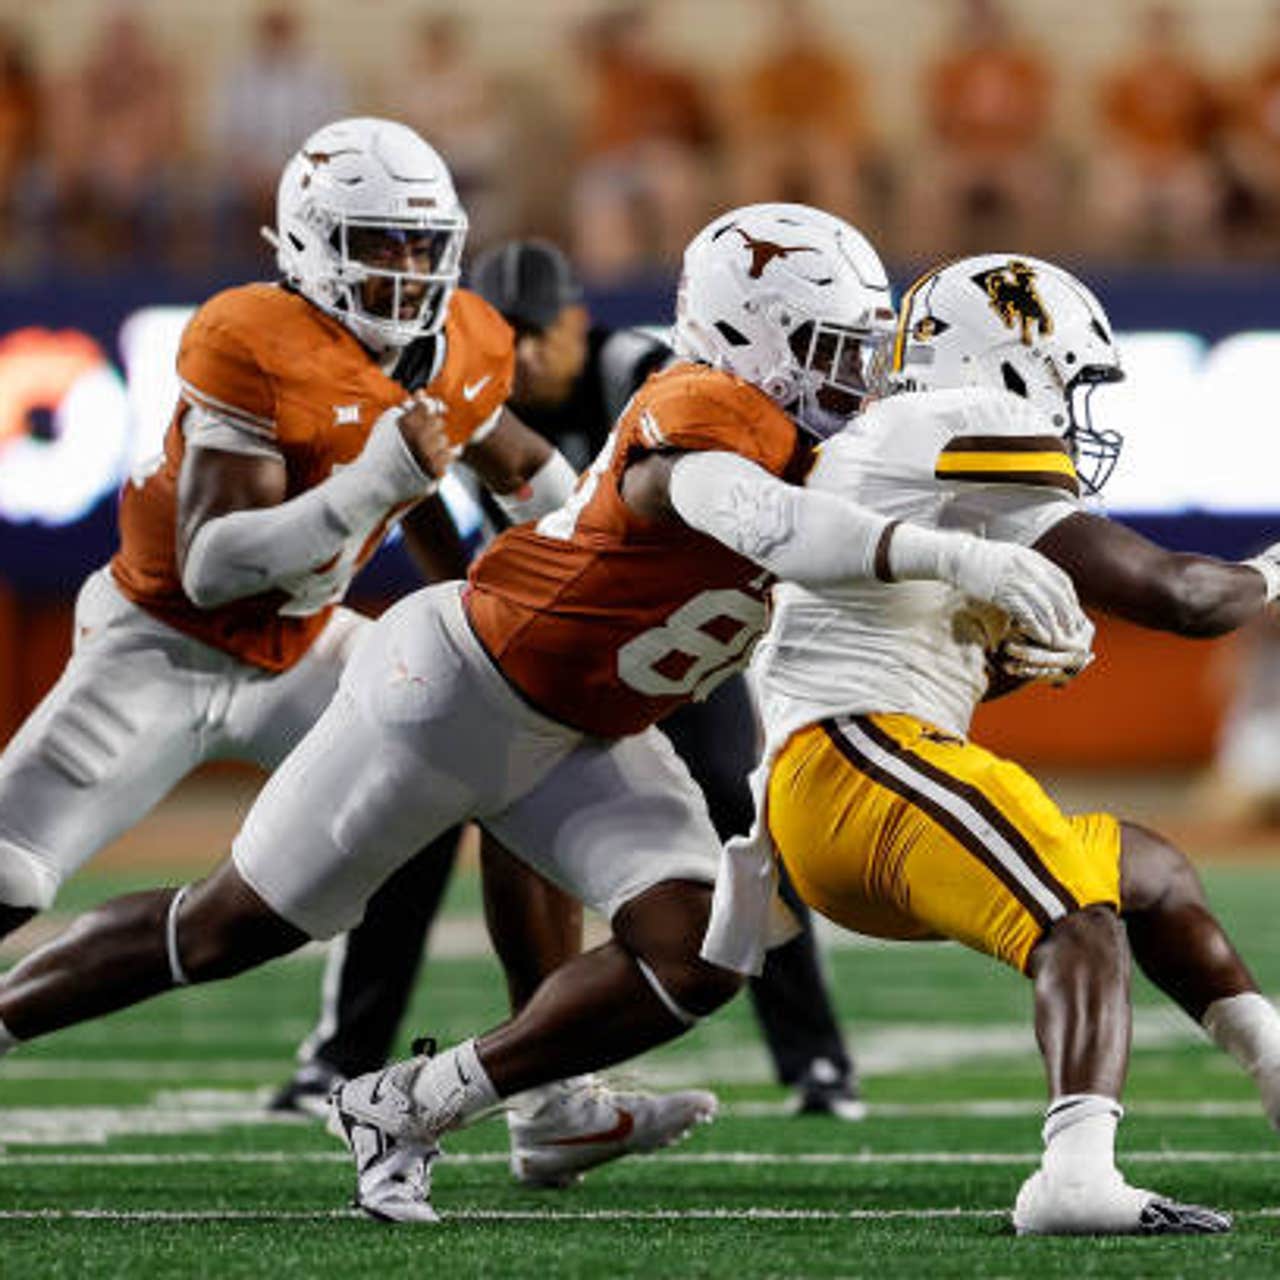 How to Watch the Wyoming vs. Texas Game: Streaming & TV Info